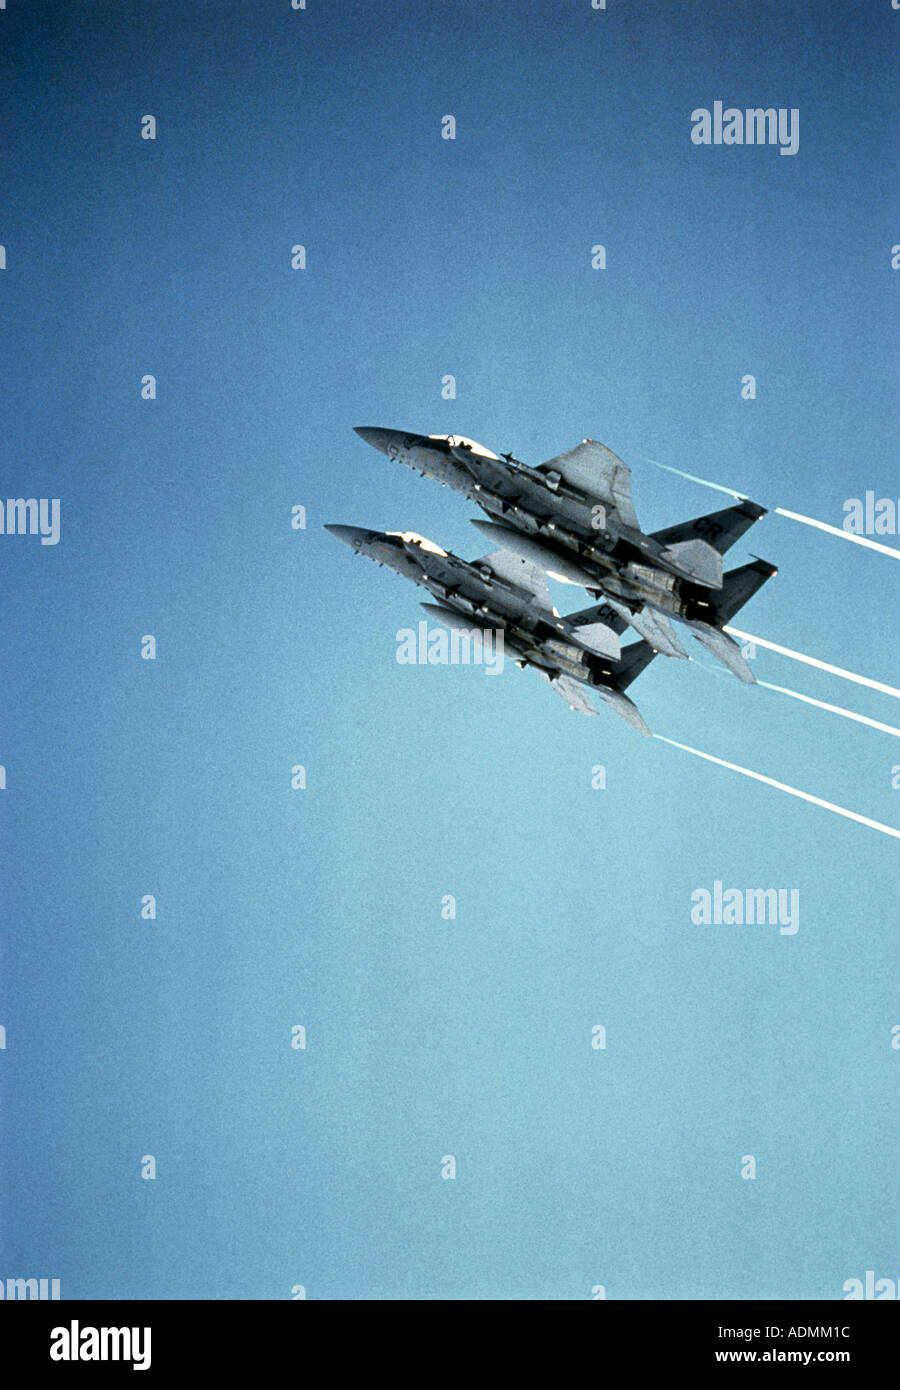 Low angle view of two F-15 Eagle fighter planes in flight Stock Photo